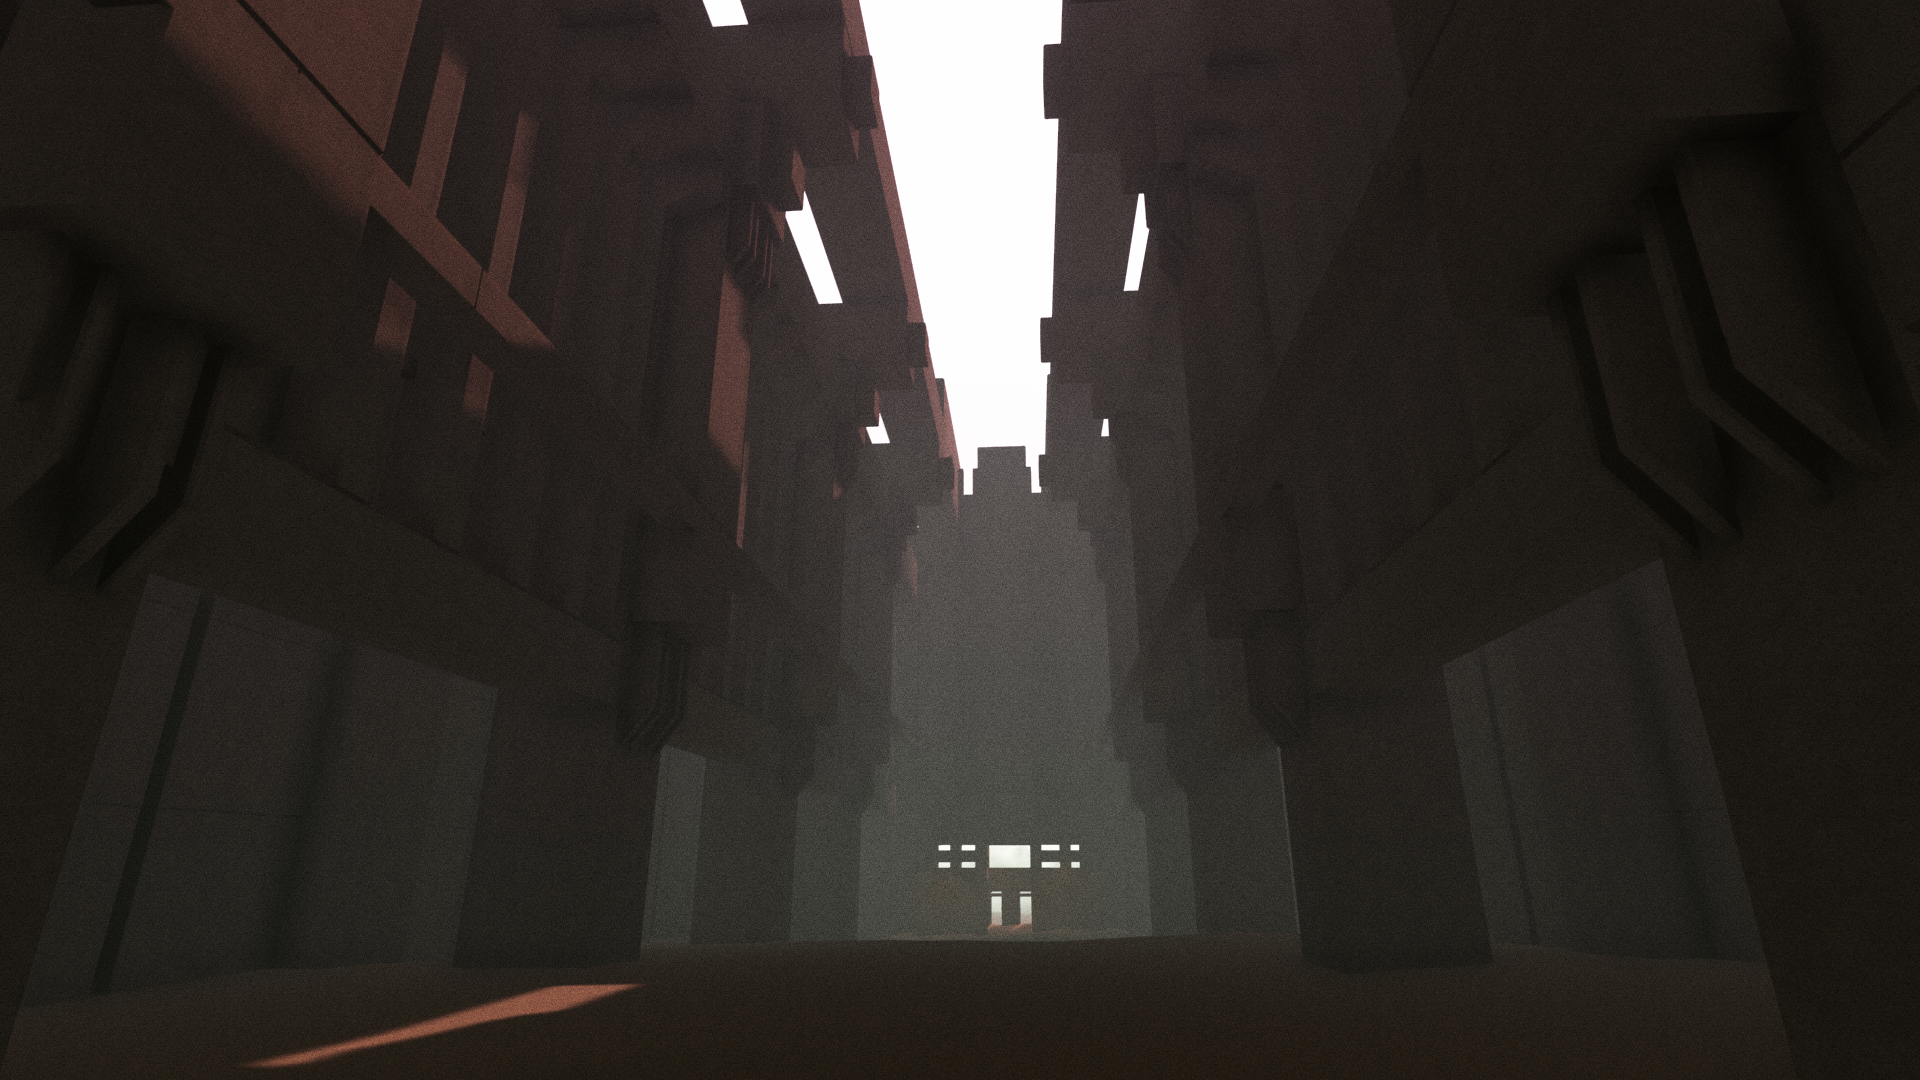 Games I played while social distancing: Fugue in Void